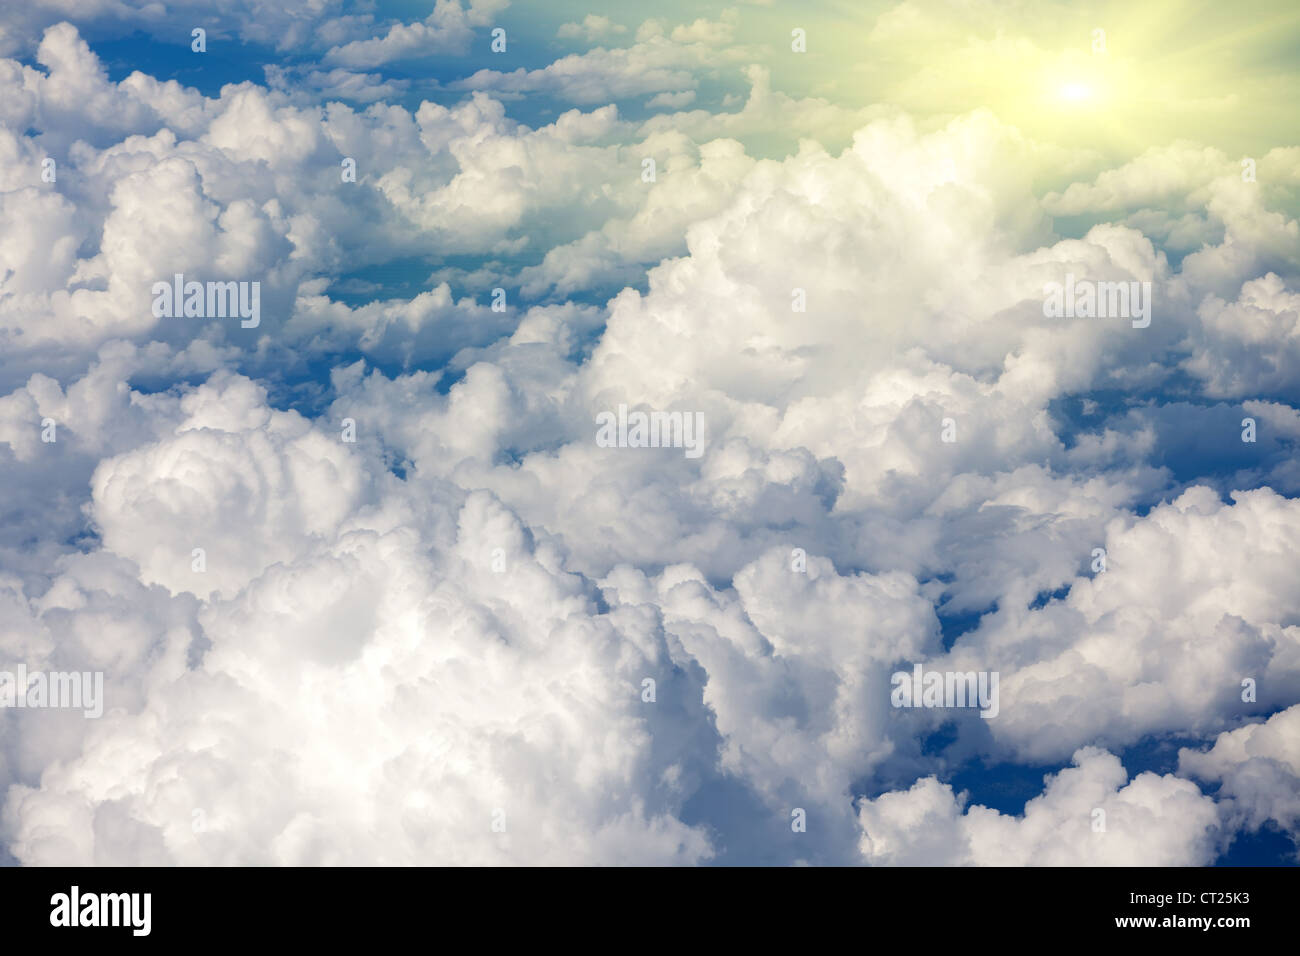 sunlight and cloudscape view from airplane Stock Photo